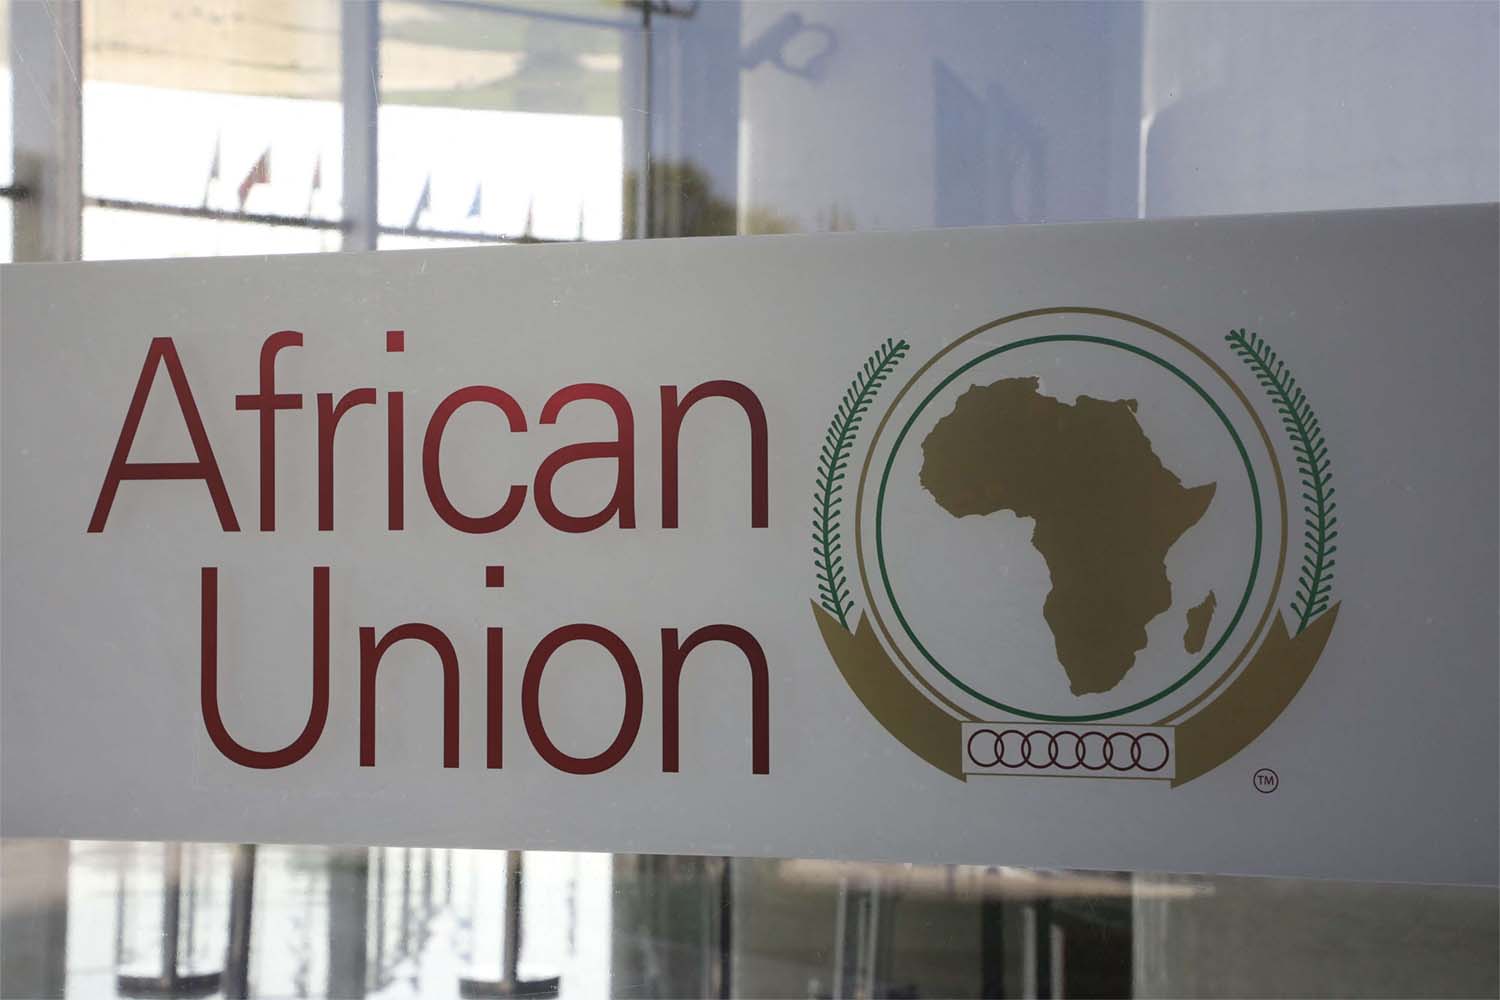 The logo of the African Union is seen at the entrance of the AU headquarters  in Addis Ababa